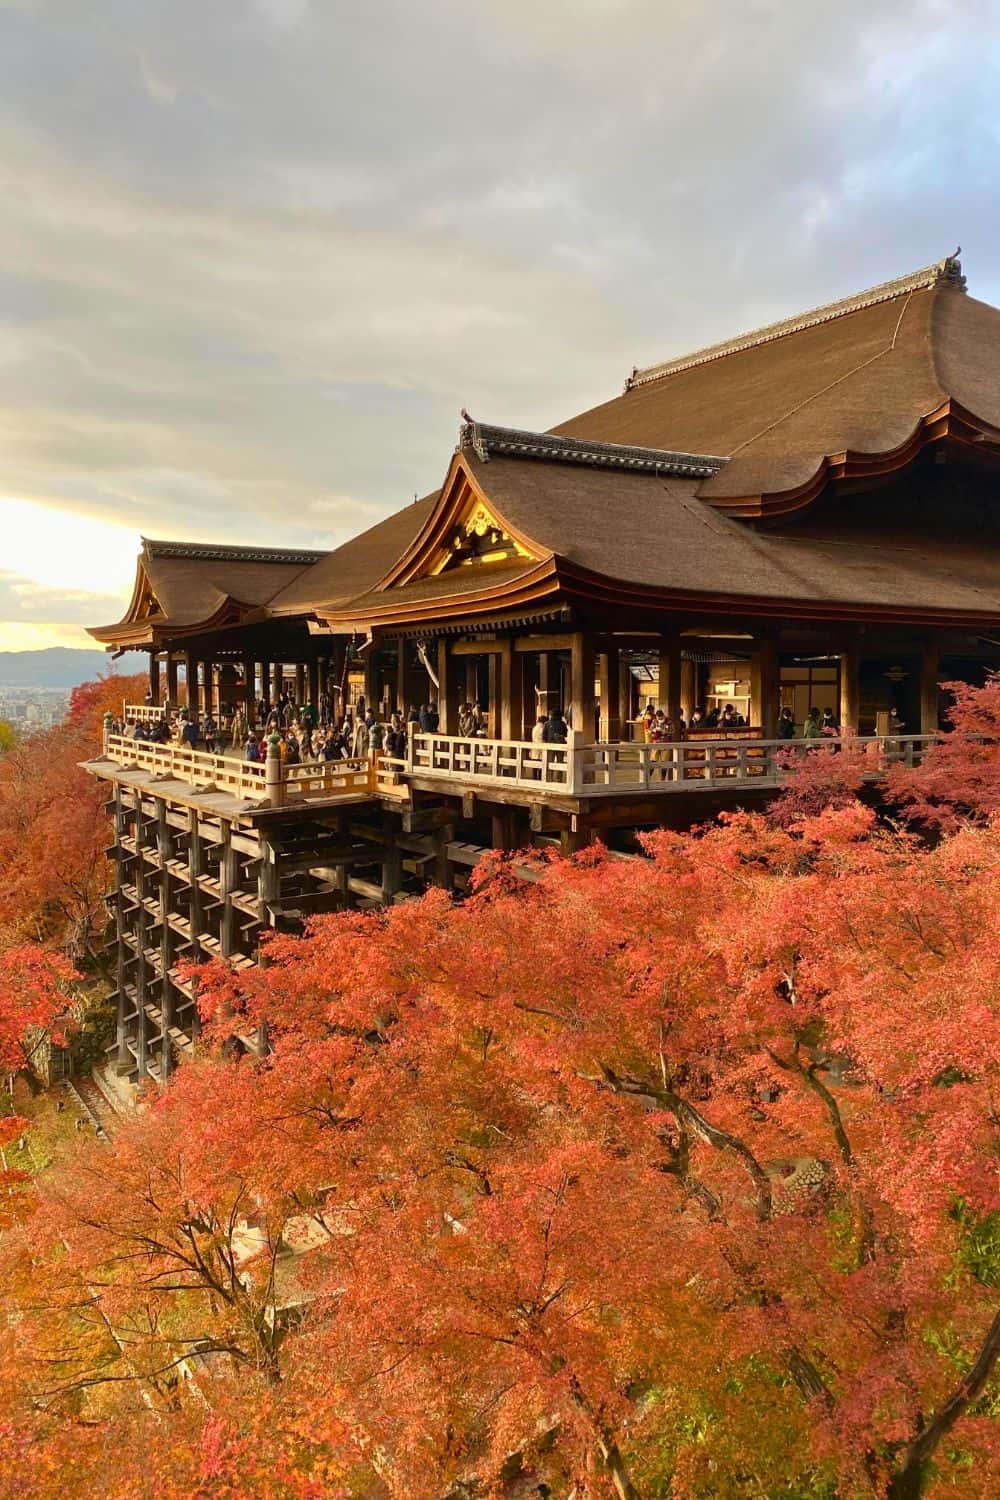 Tips for First-Time Visitors to Kyoto